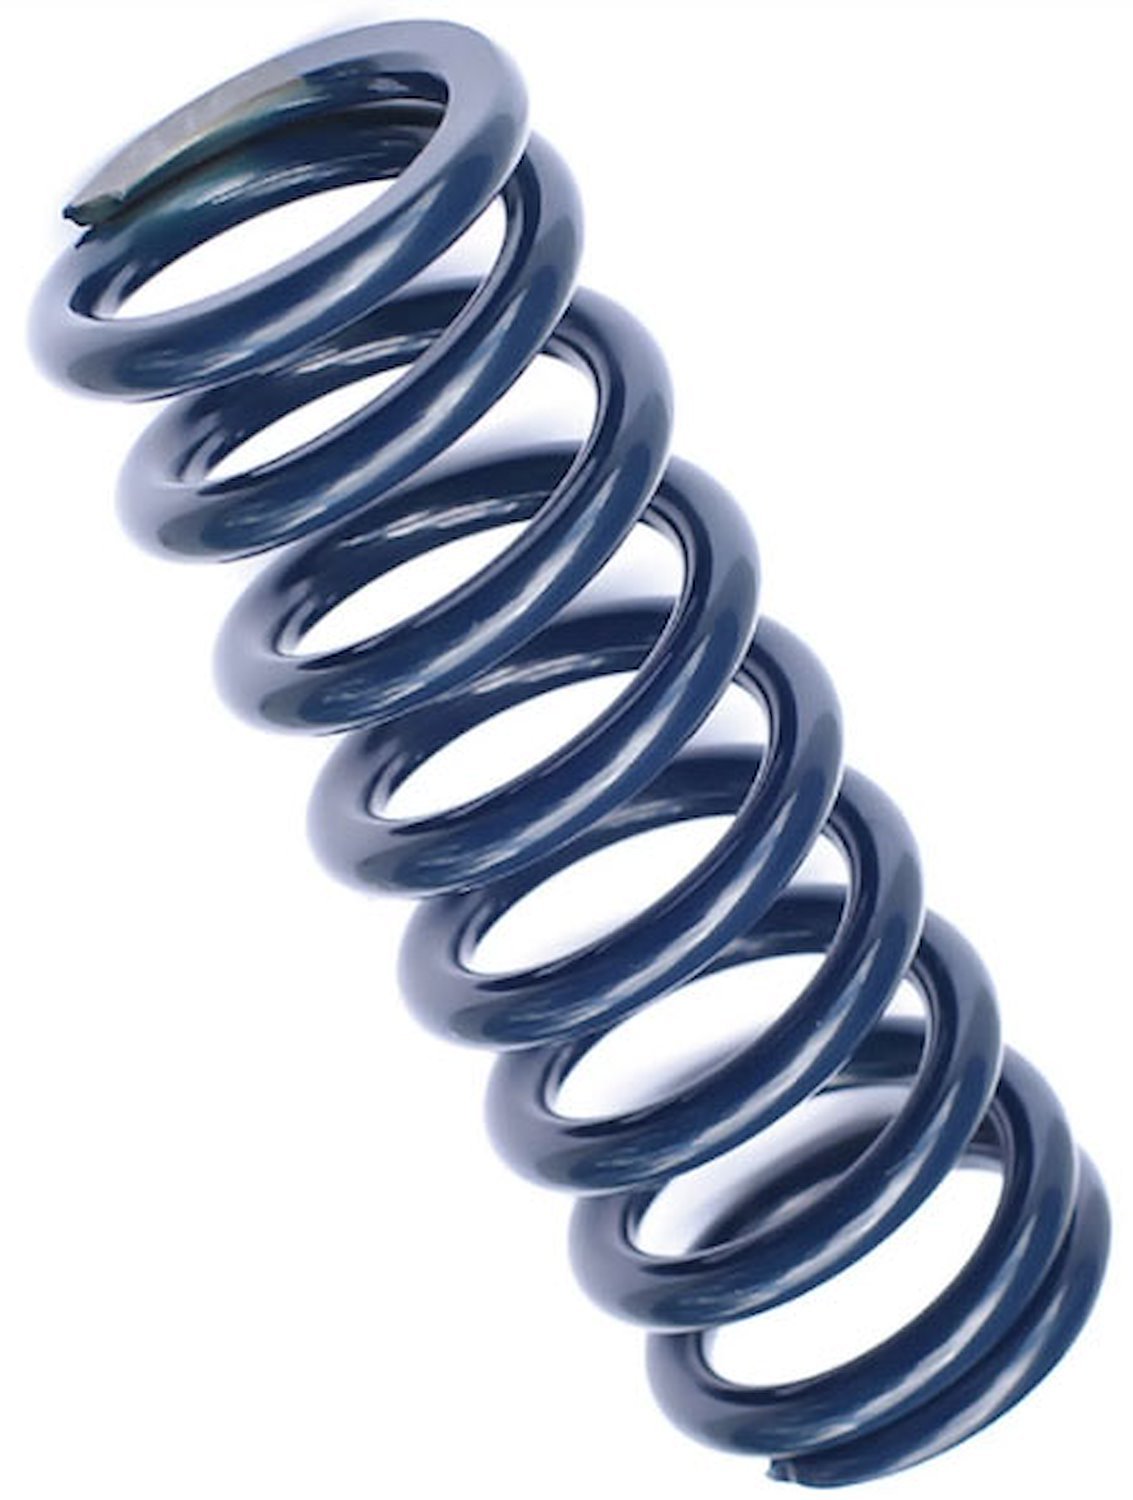 Coil-Over Spring 850 lb. Spring Rate [10 in.